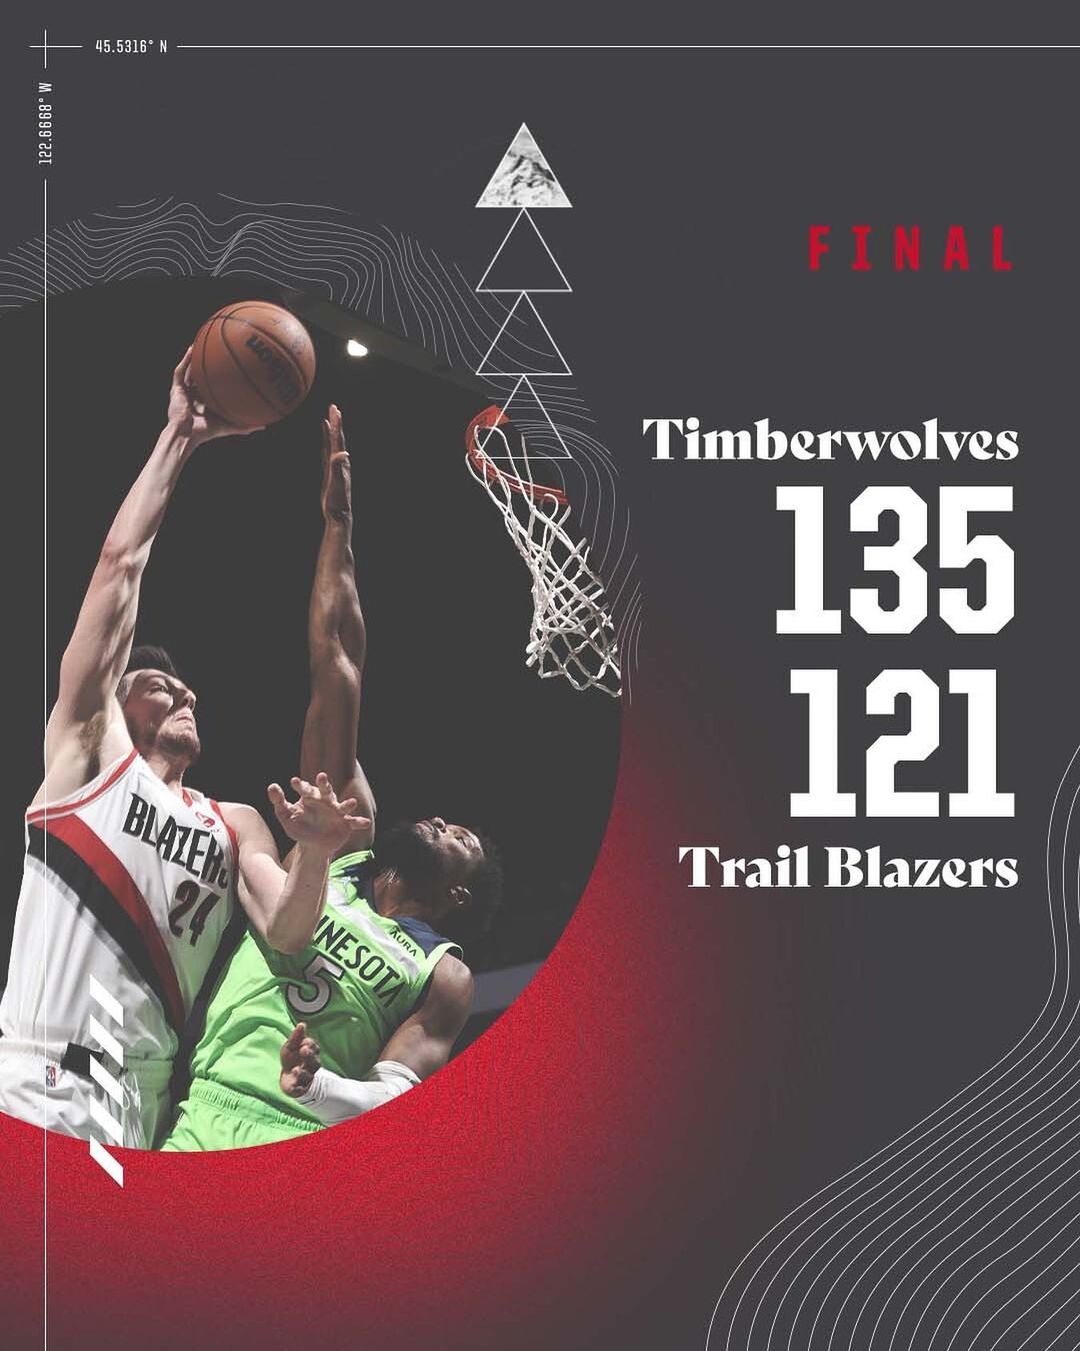 8 guys available to play, fought till the end.  #RipCity...